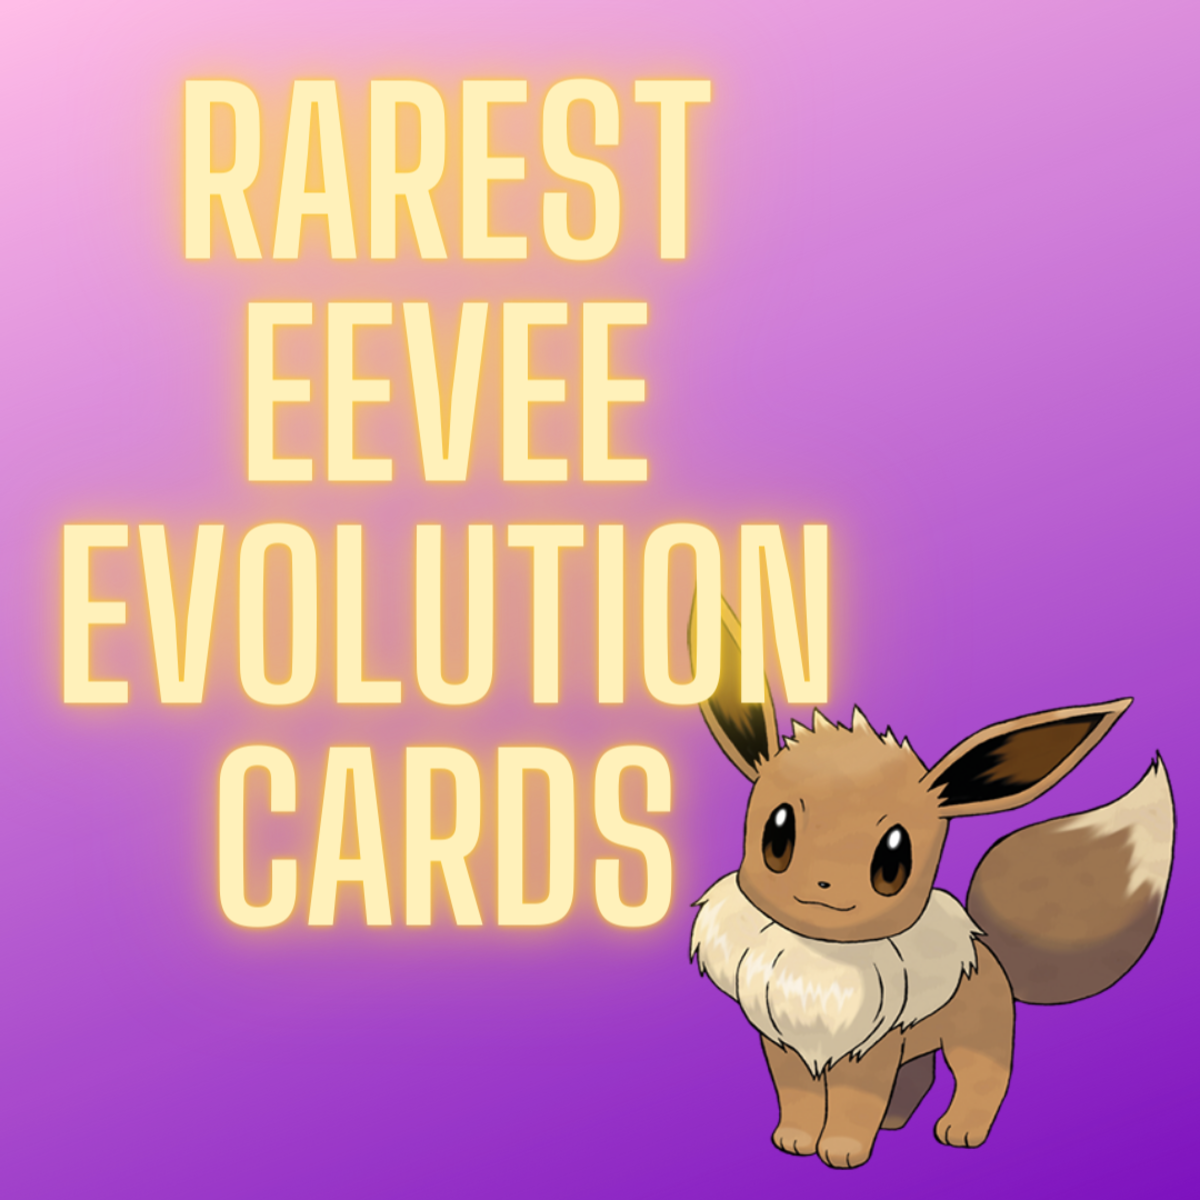 Eevee is a beloved Pokémon and the first to be capable of transforming into multiple different Stage 1 evolutions. Check out this list of 10 of the rarest Eevee evolution cards! 